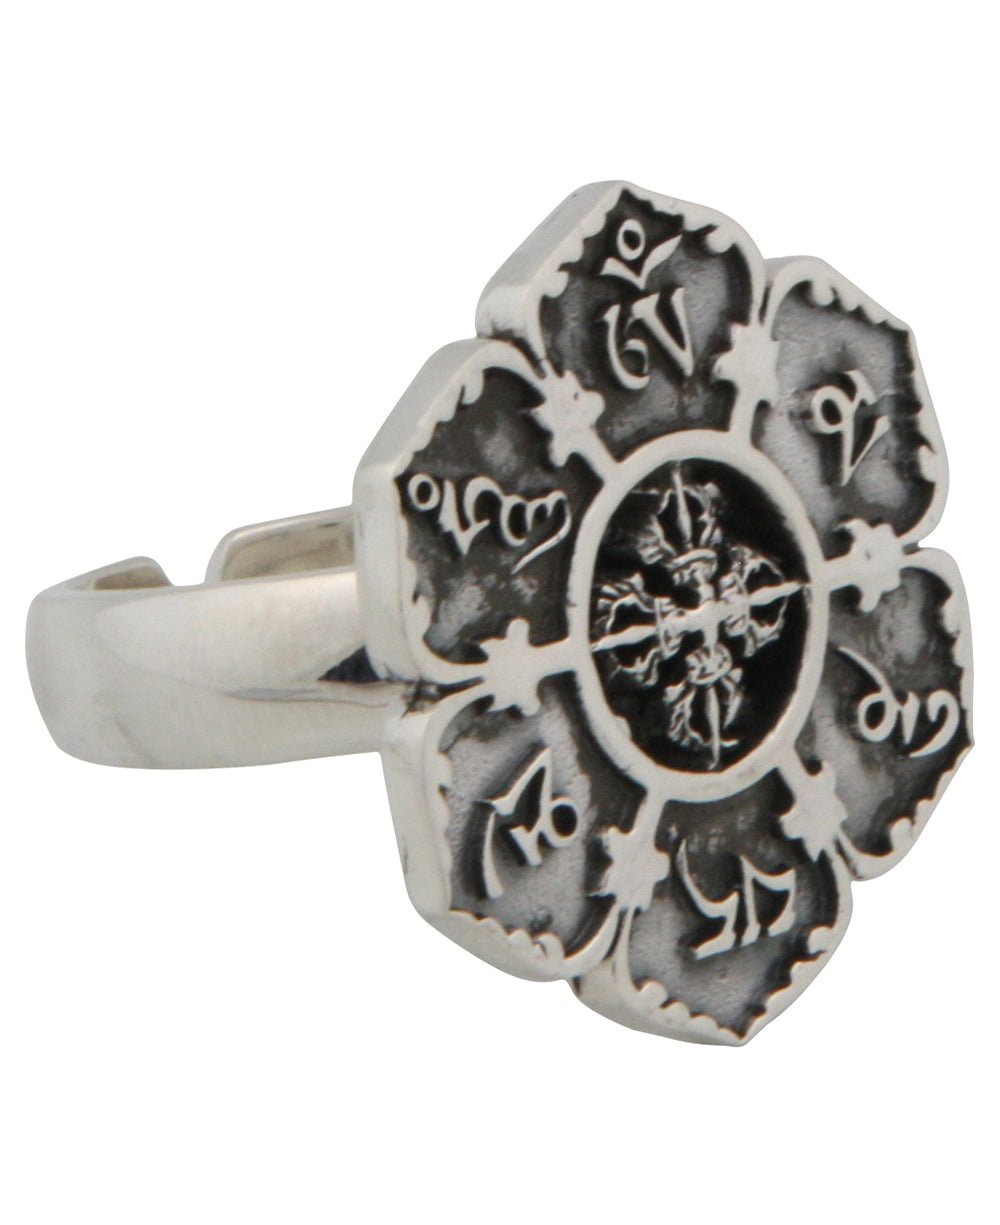 Om Mani Padme Hum Mantra Ring, Sterling Silver - Rings